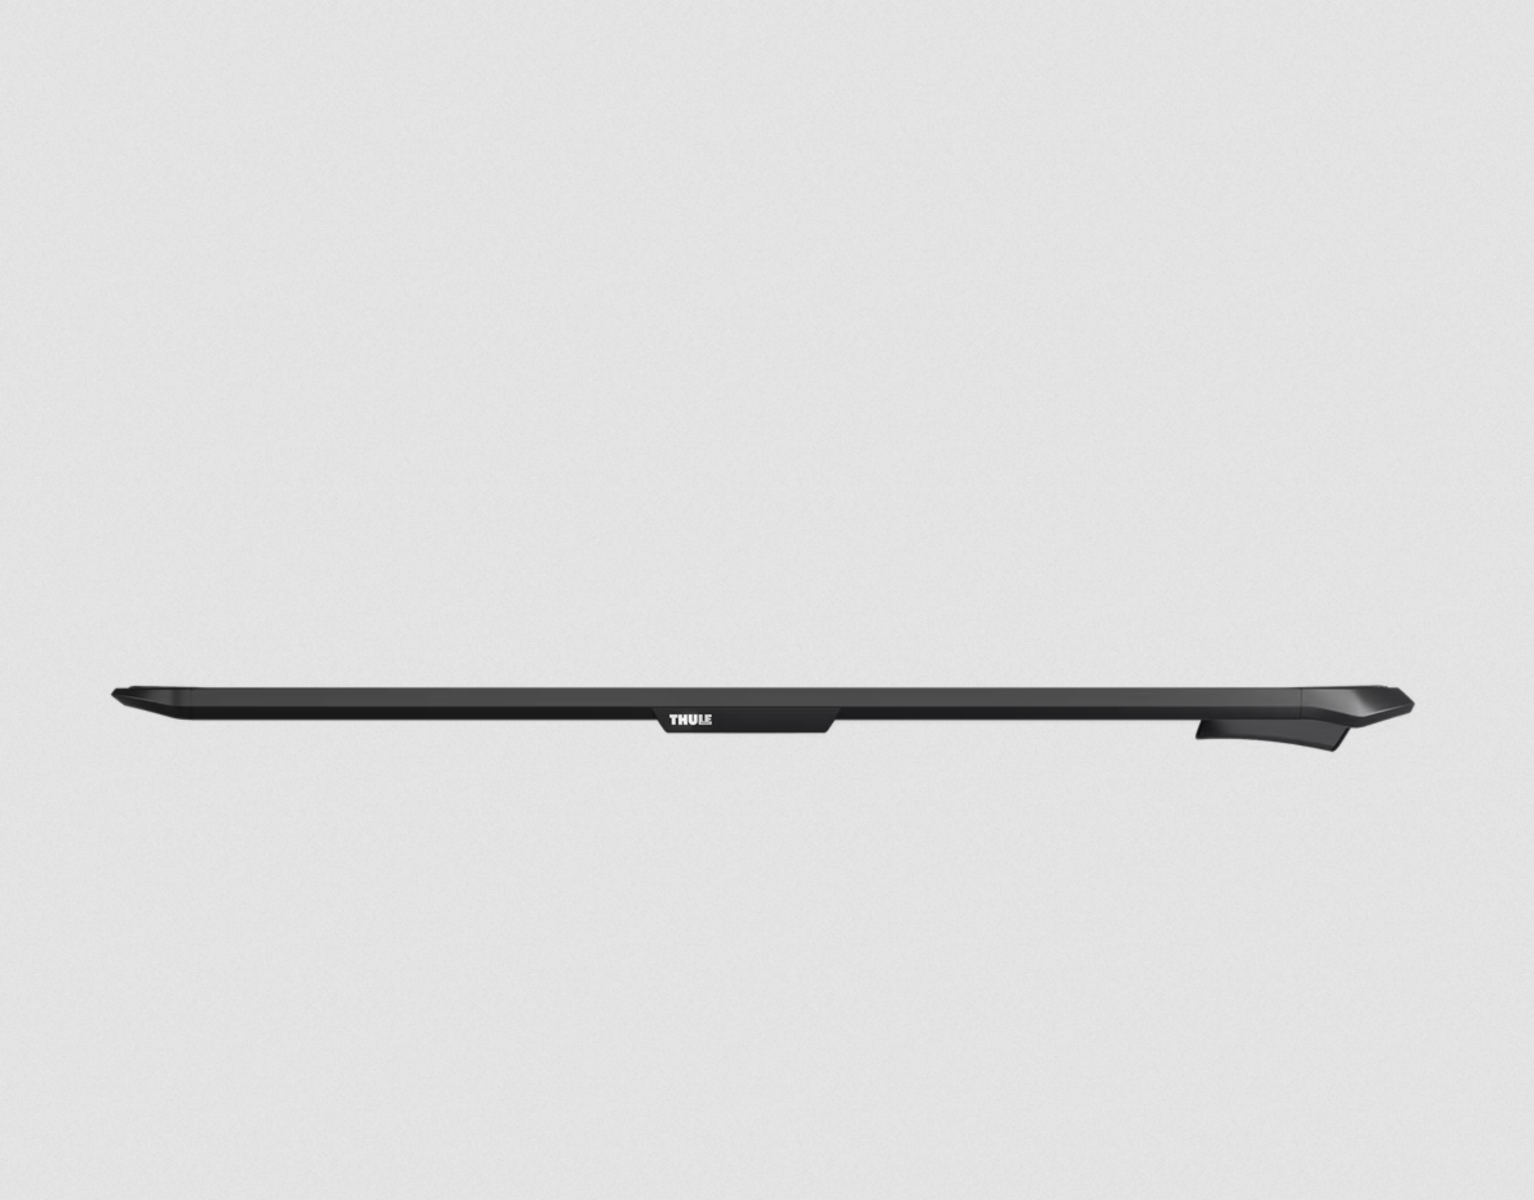 Thule Caprock Platform (1500 x 1330mm) for Holden Astra AH 5dr Wagon with Flush Roof Rail (2007 to 2011) - Flush Rail Mount